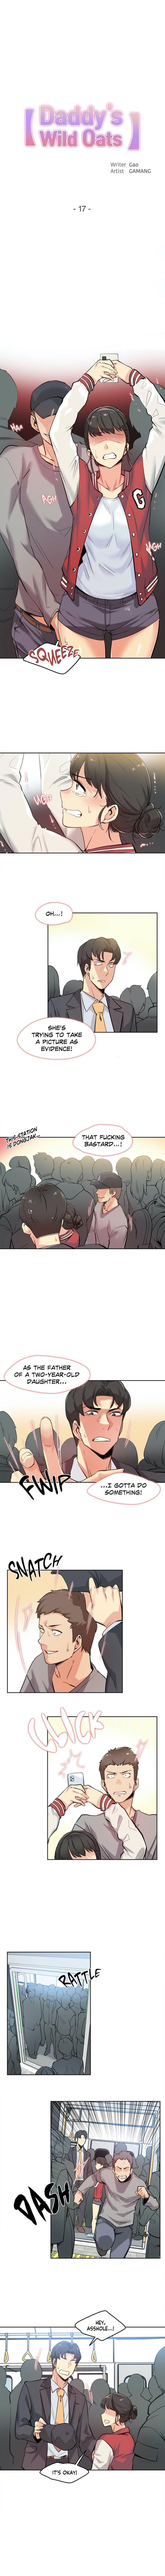 DADDY'S WILD OATS | Surrogate Father Ch. 1-17 115